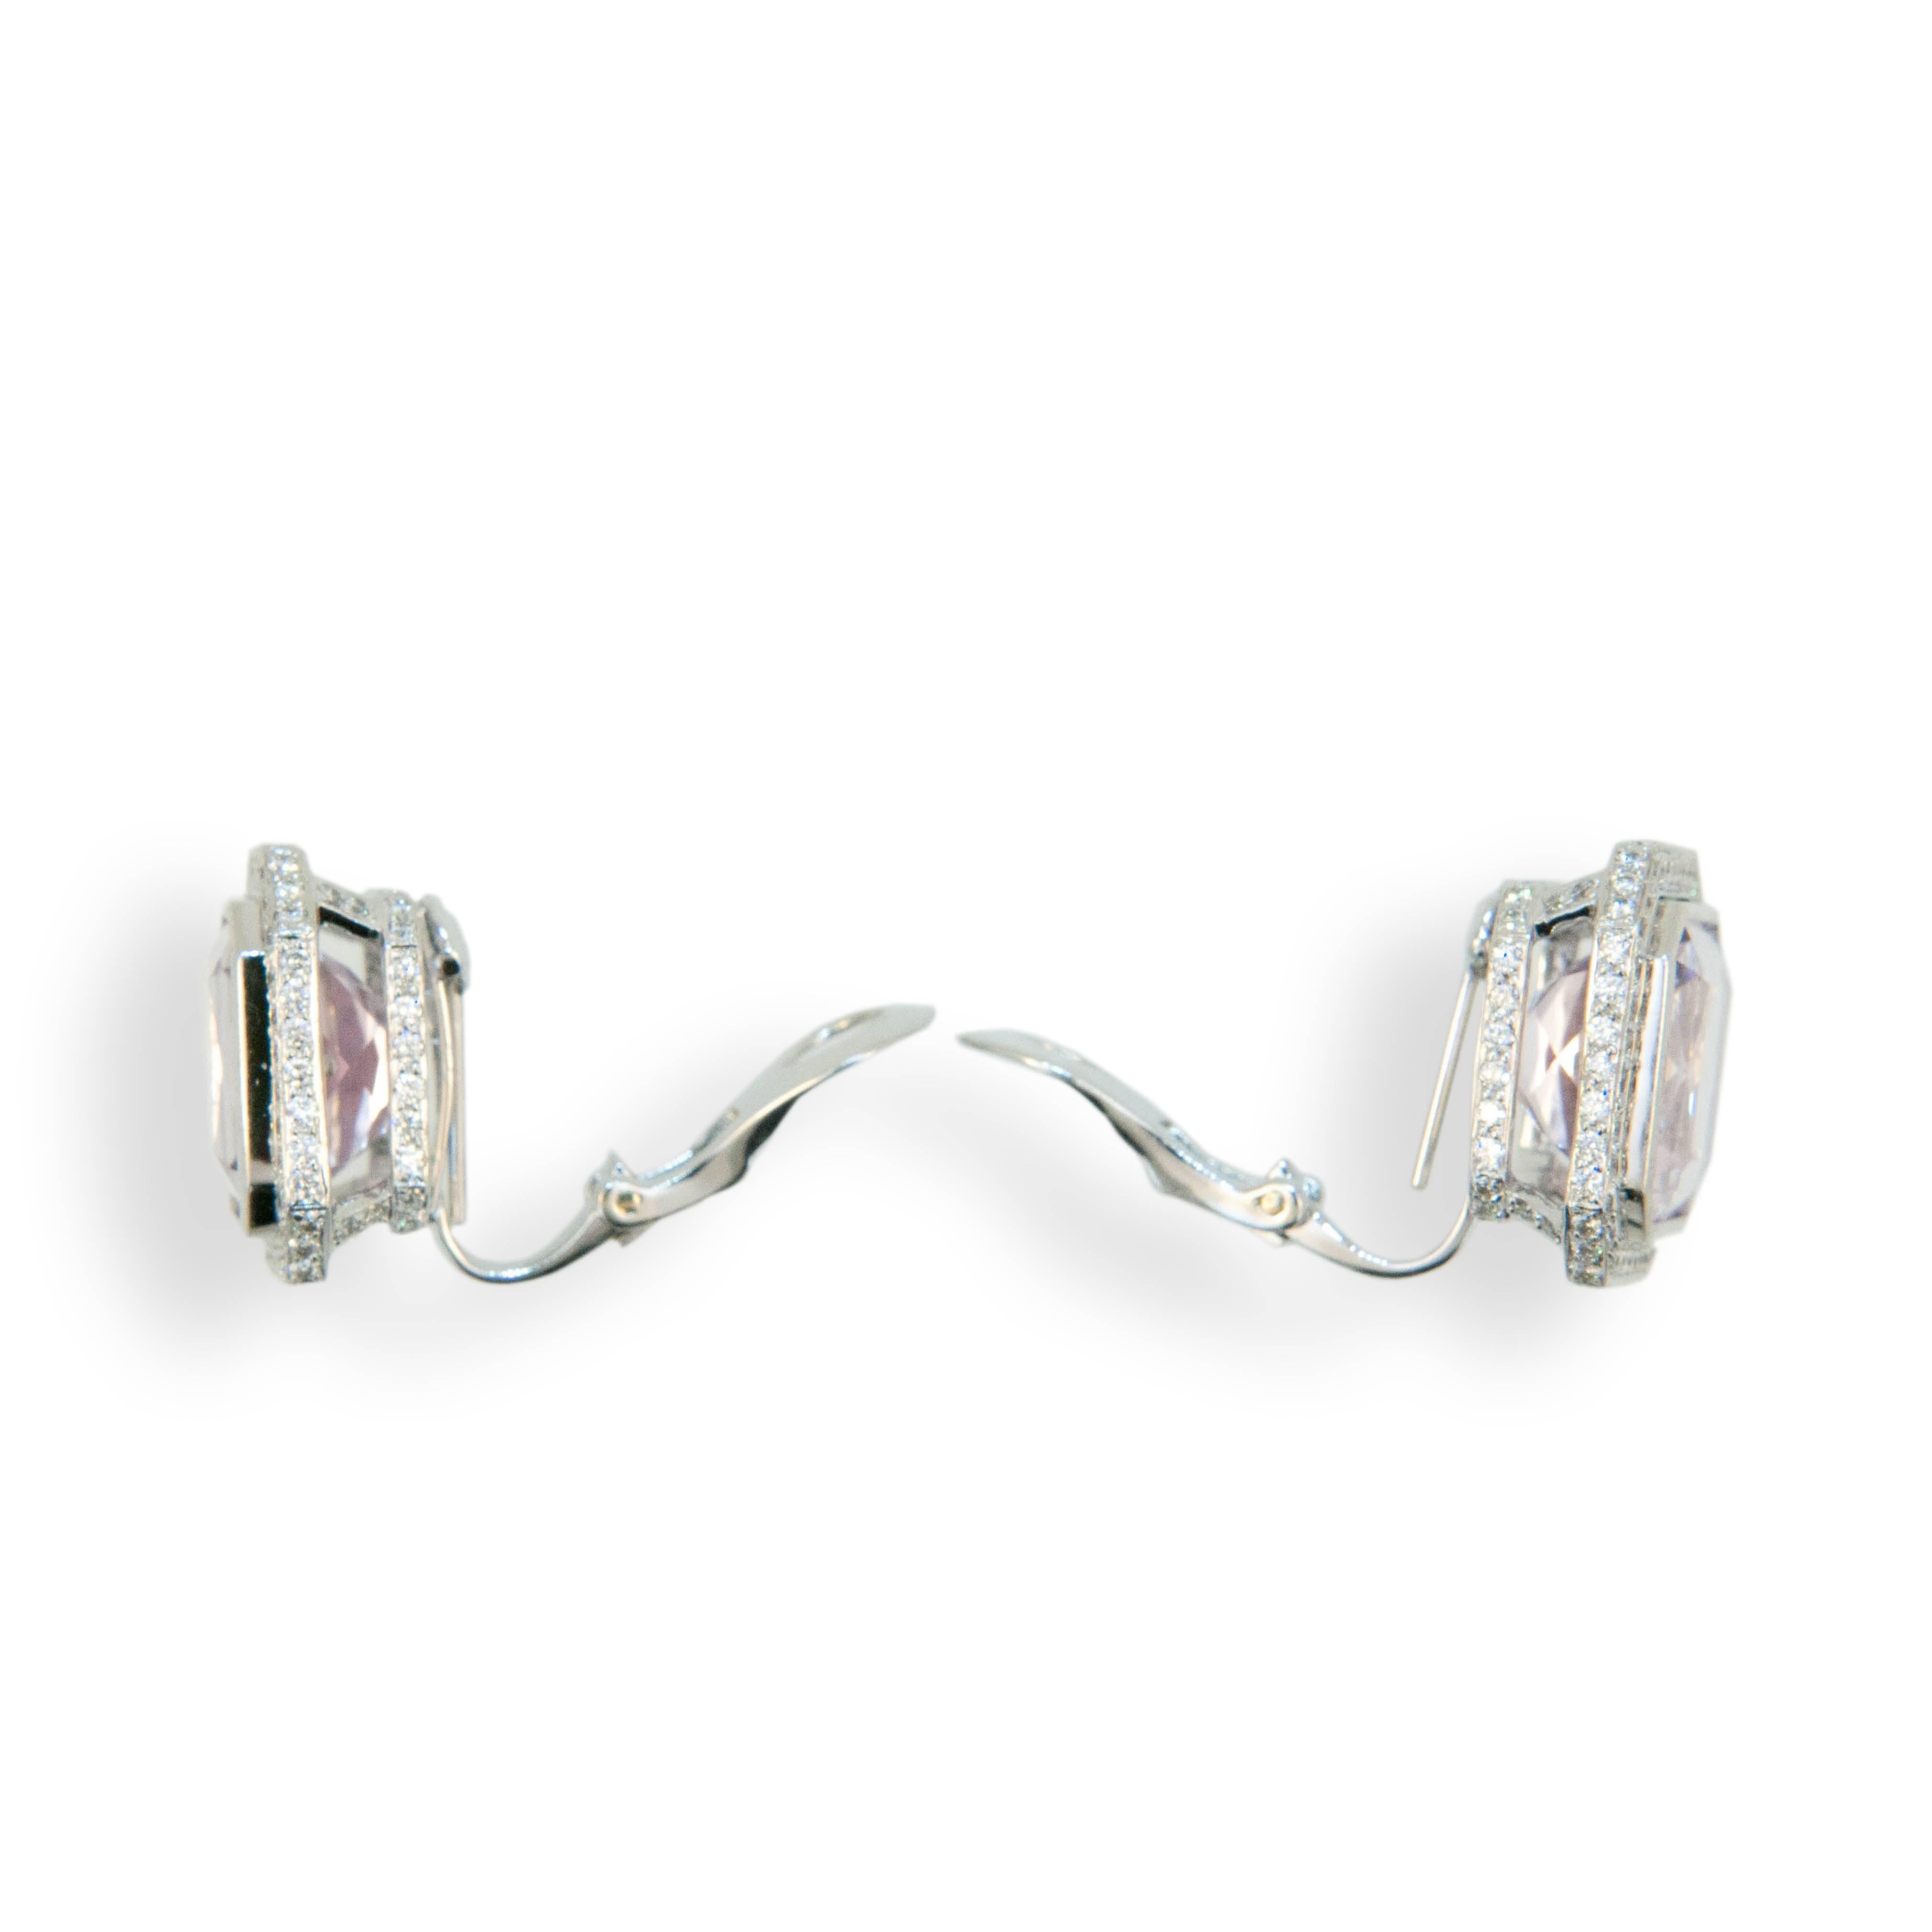 Laura Munder Kunzite Diamond White Gold Earrings In New Condition For Sale In West Palm Beach, FL